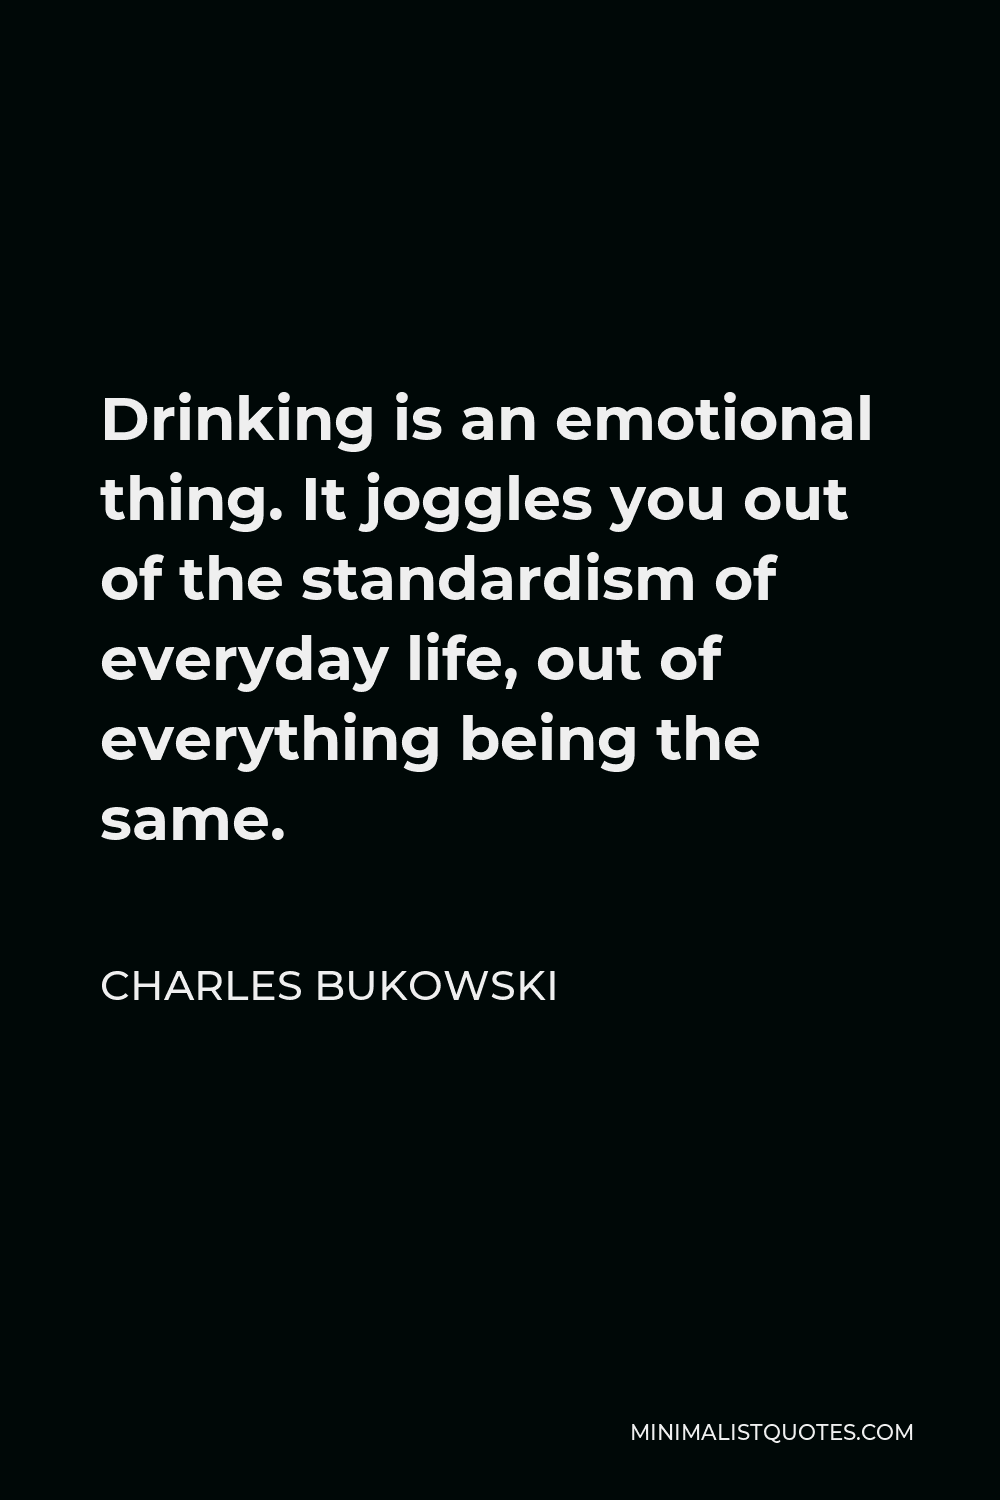 Charles Bukowski Quote - Drinking is an emotional thing. It joggles you out of the standardism of everyday life, out of everything being the same.